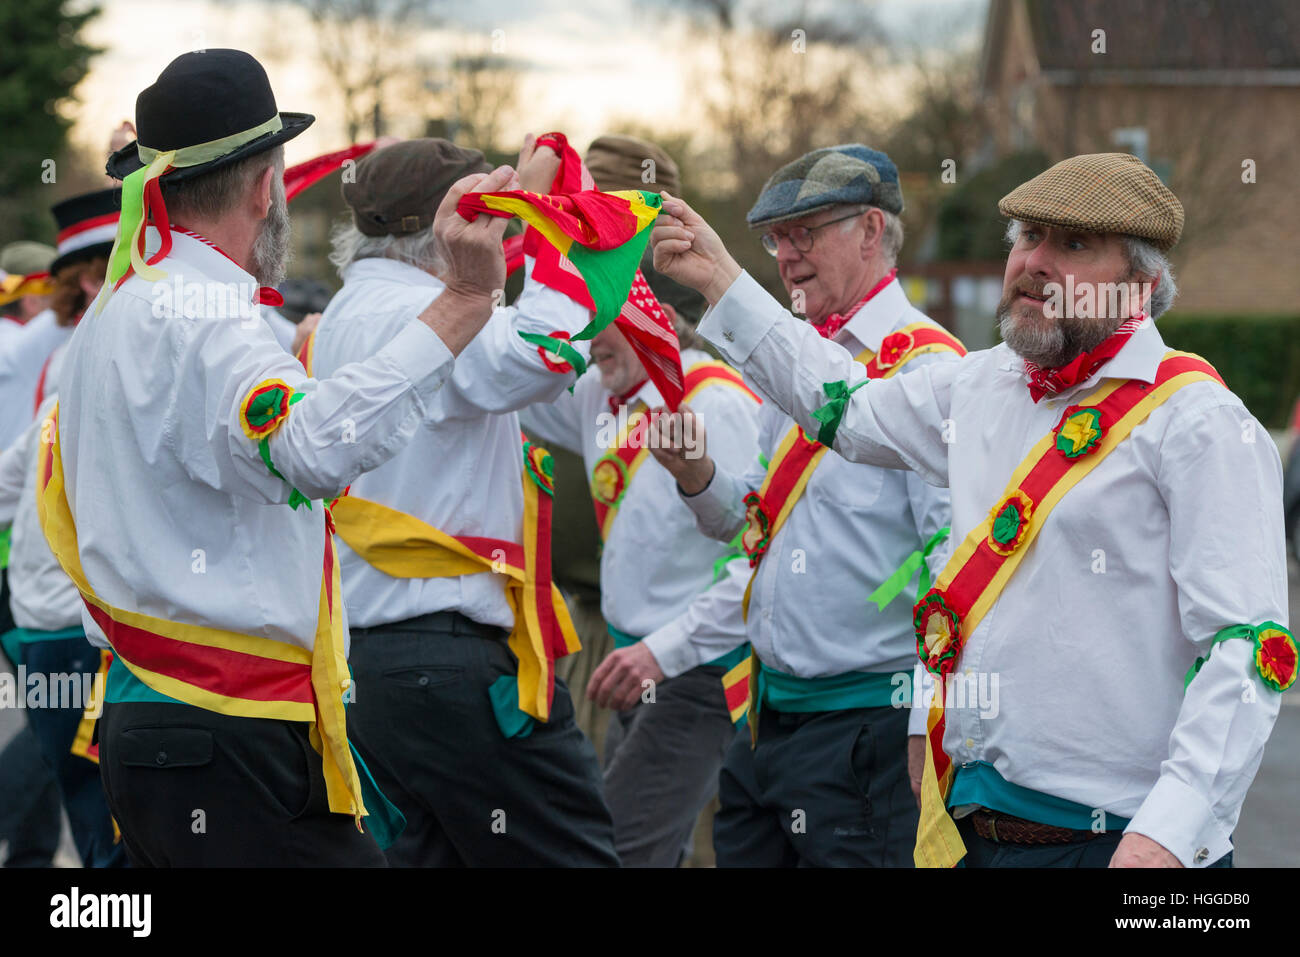 Comberton Cambridge UK 9th January 2017. The Cambridge Morris Men perform a Molly dance in the street to celebrate Plough Monday, the traditional start of the new agricultural year on the first Monday after Epiphany, the Twelfth Day of Christmas. This is a tradition popular in East Anglia. Today the group performed at schools and will join up other dancers to continue celebrations in local pubs. Credit Julian Eales/Alamy Live News Stock Photo